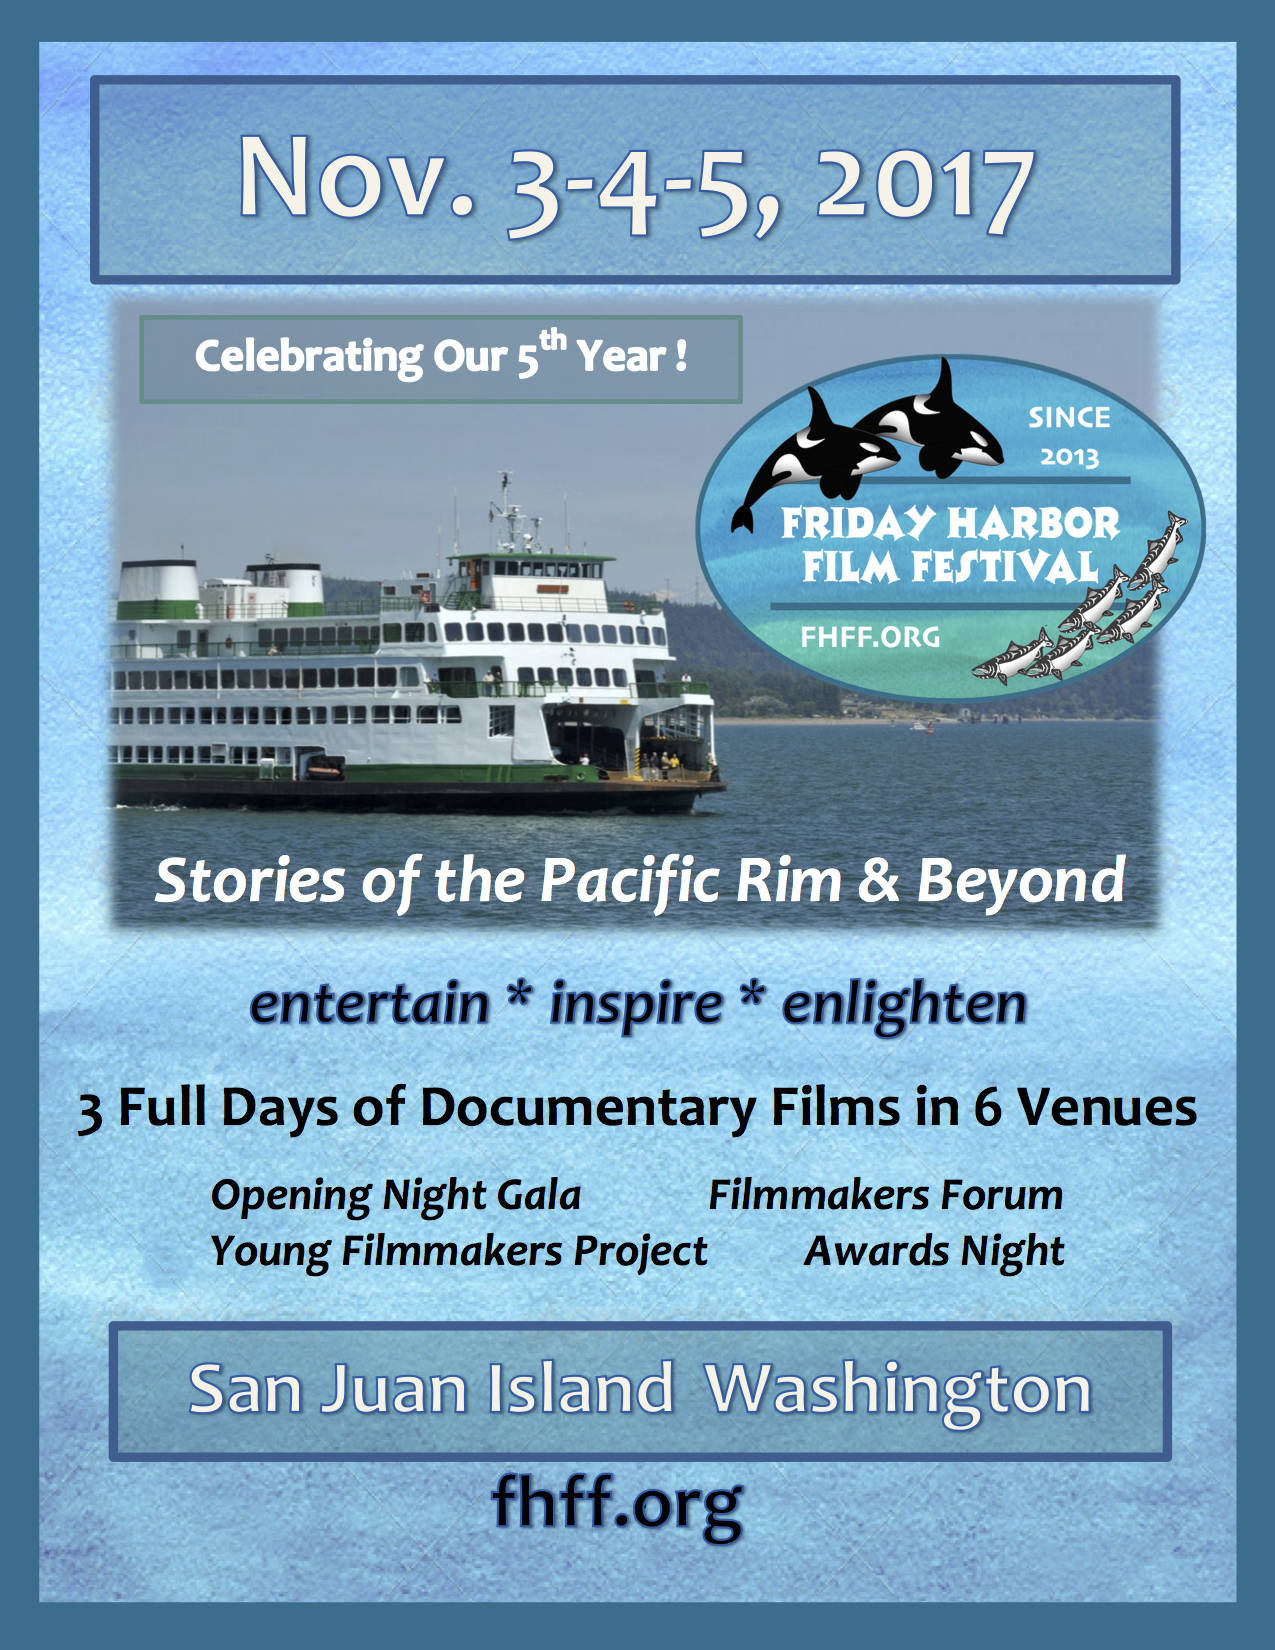 Friday Harbor Film Festival tickets for sale; volunteers needed